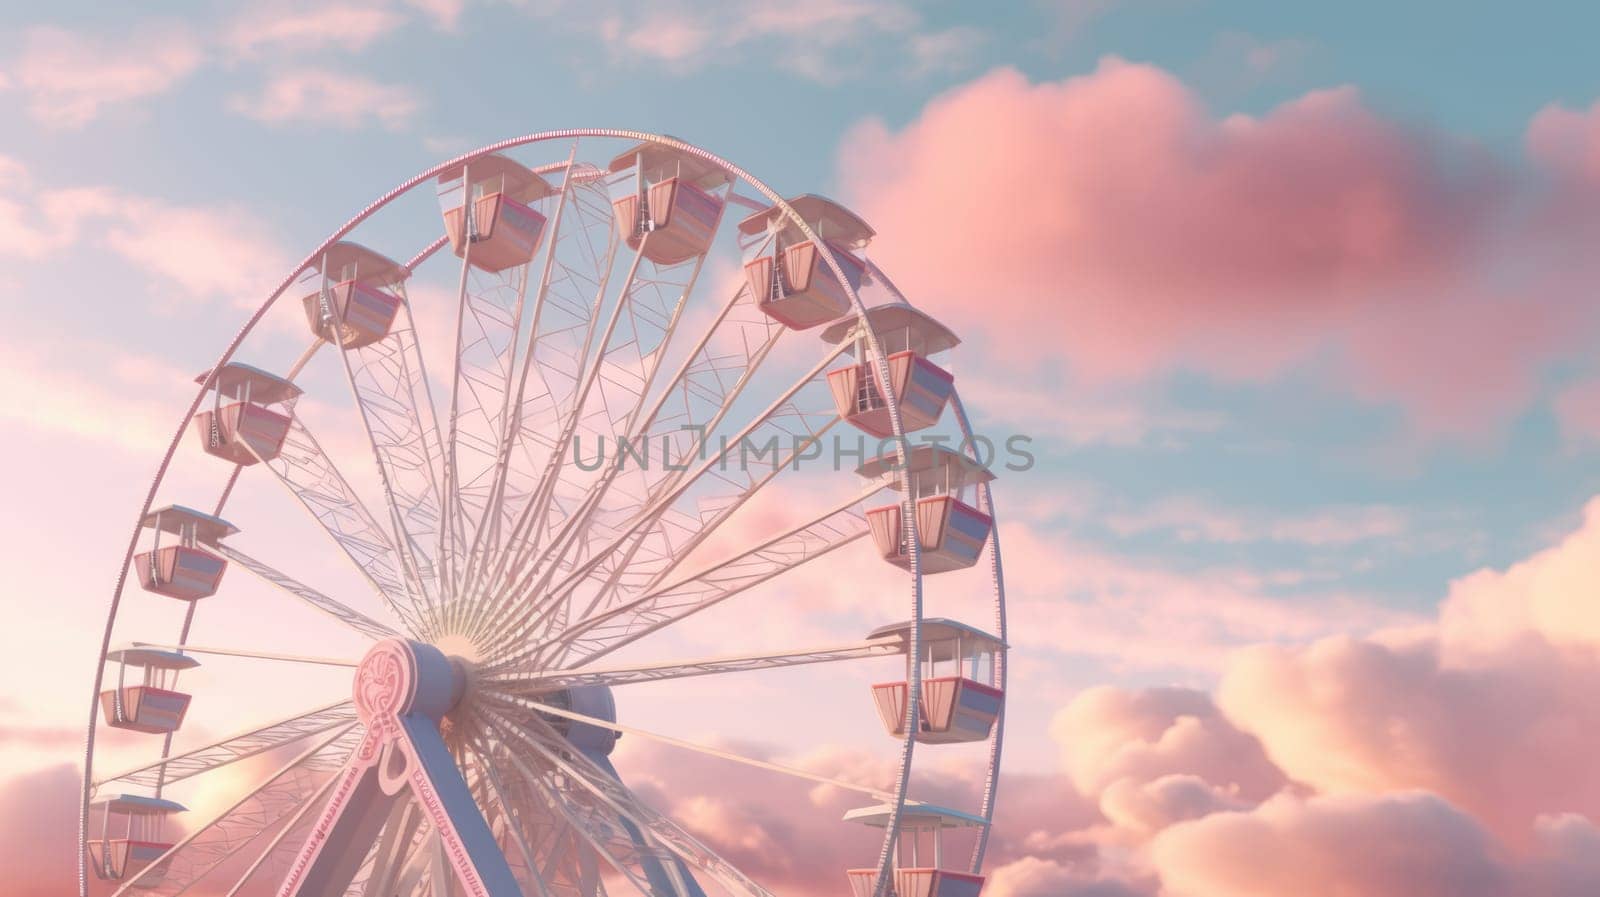 A Ferris wheel at an amusement park with a beautiful cloudy sky in the background. The Ferris wheel is pink and has 10 gondolas. The sky is a gradient of pink and orange, with white clouds.